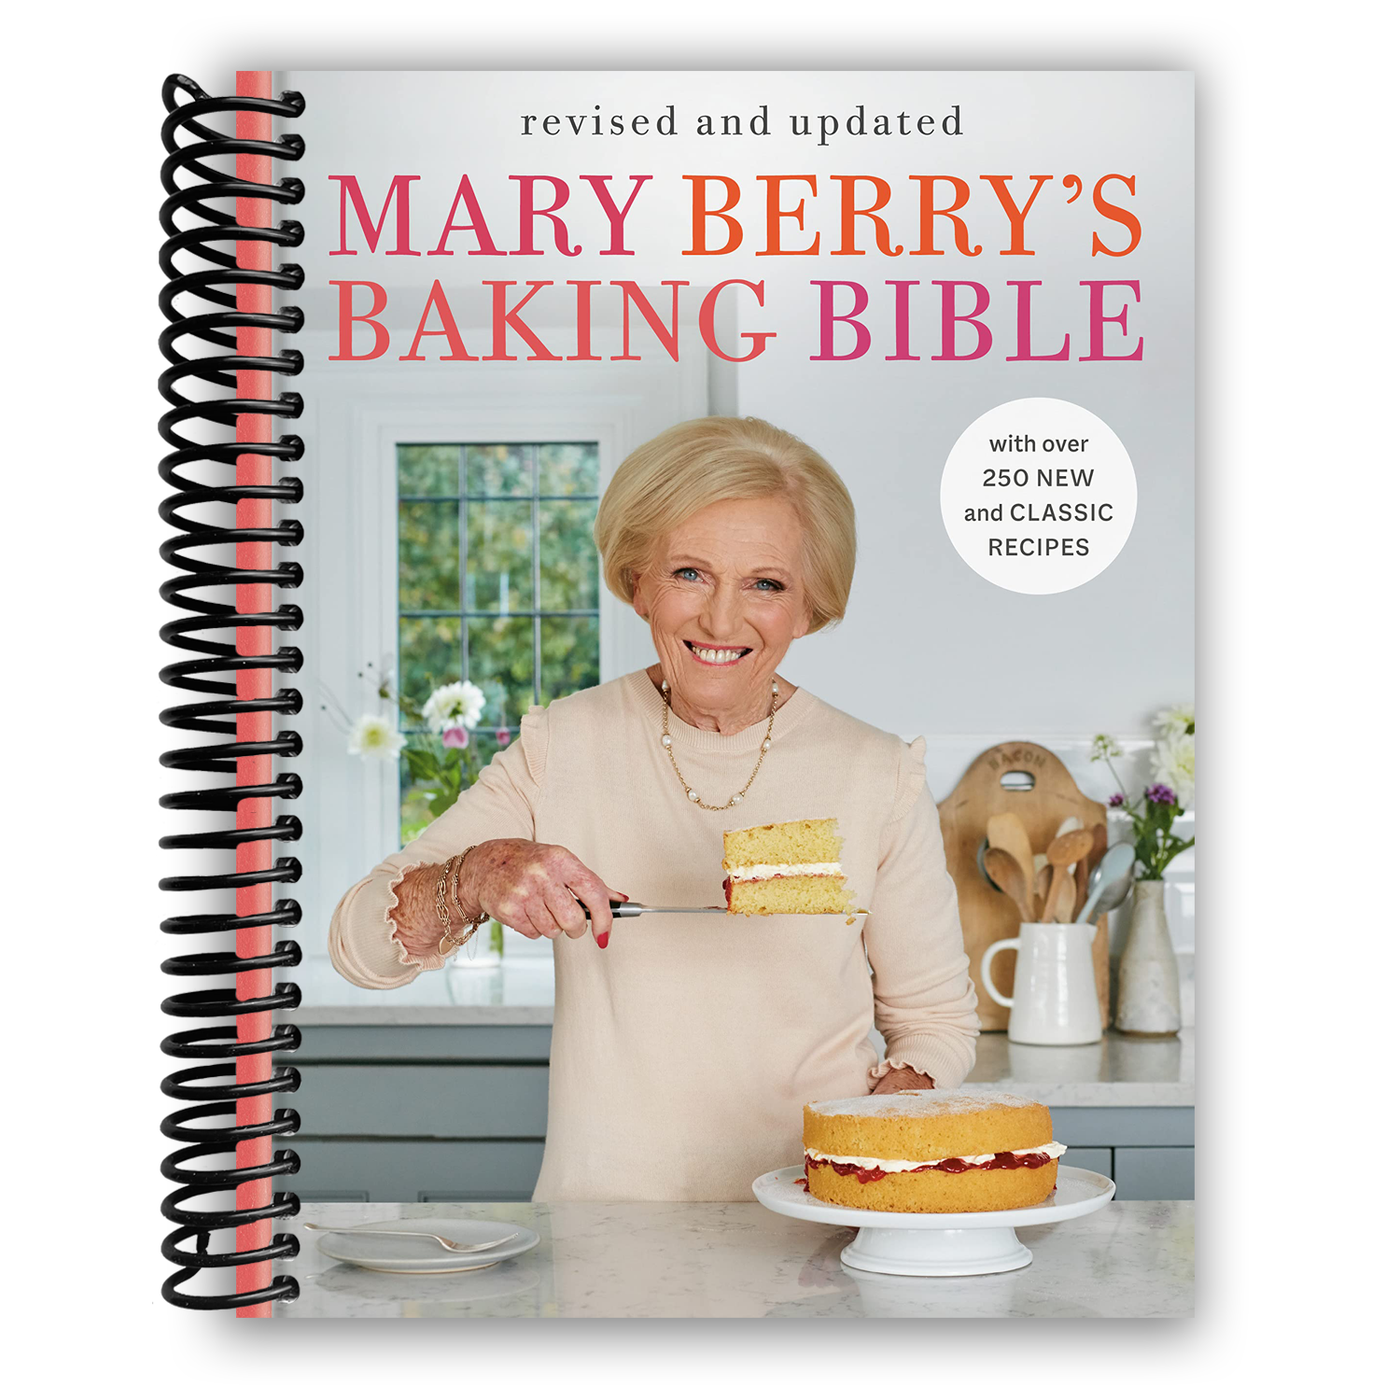 Mary Berry's Baking Bible(Revised and Updated): With Over 250 New and Classic Recipes (Spiral Bound)